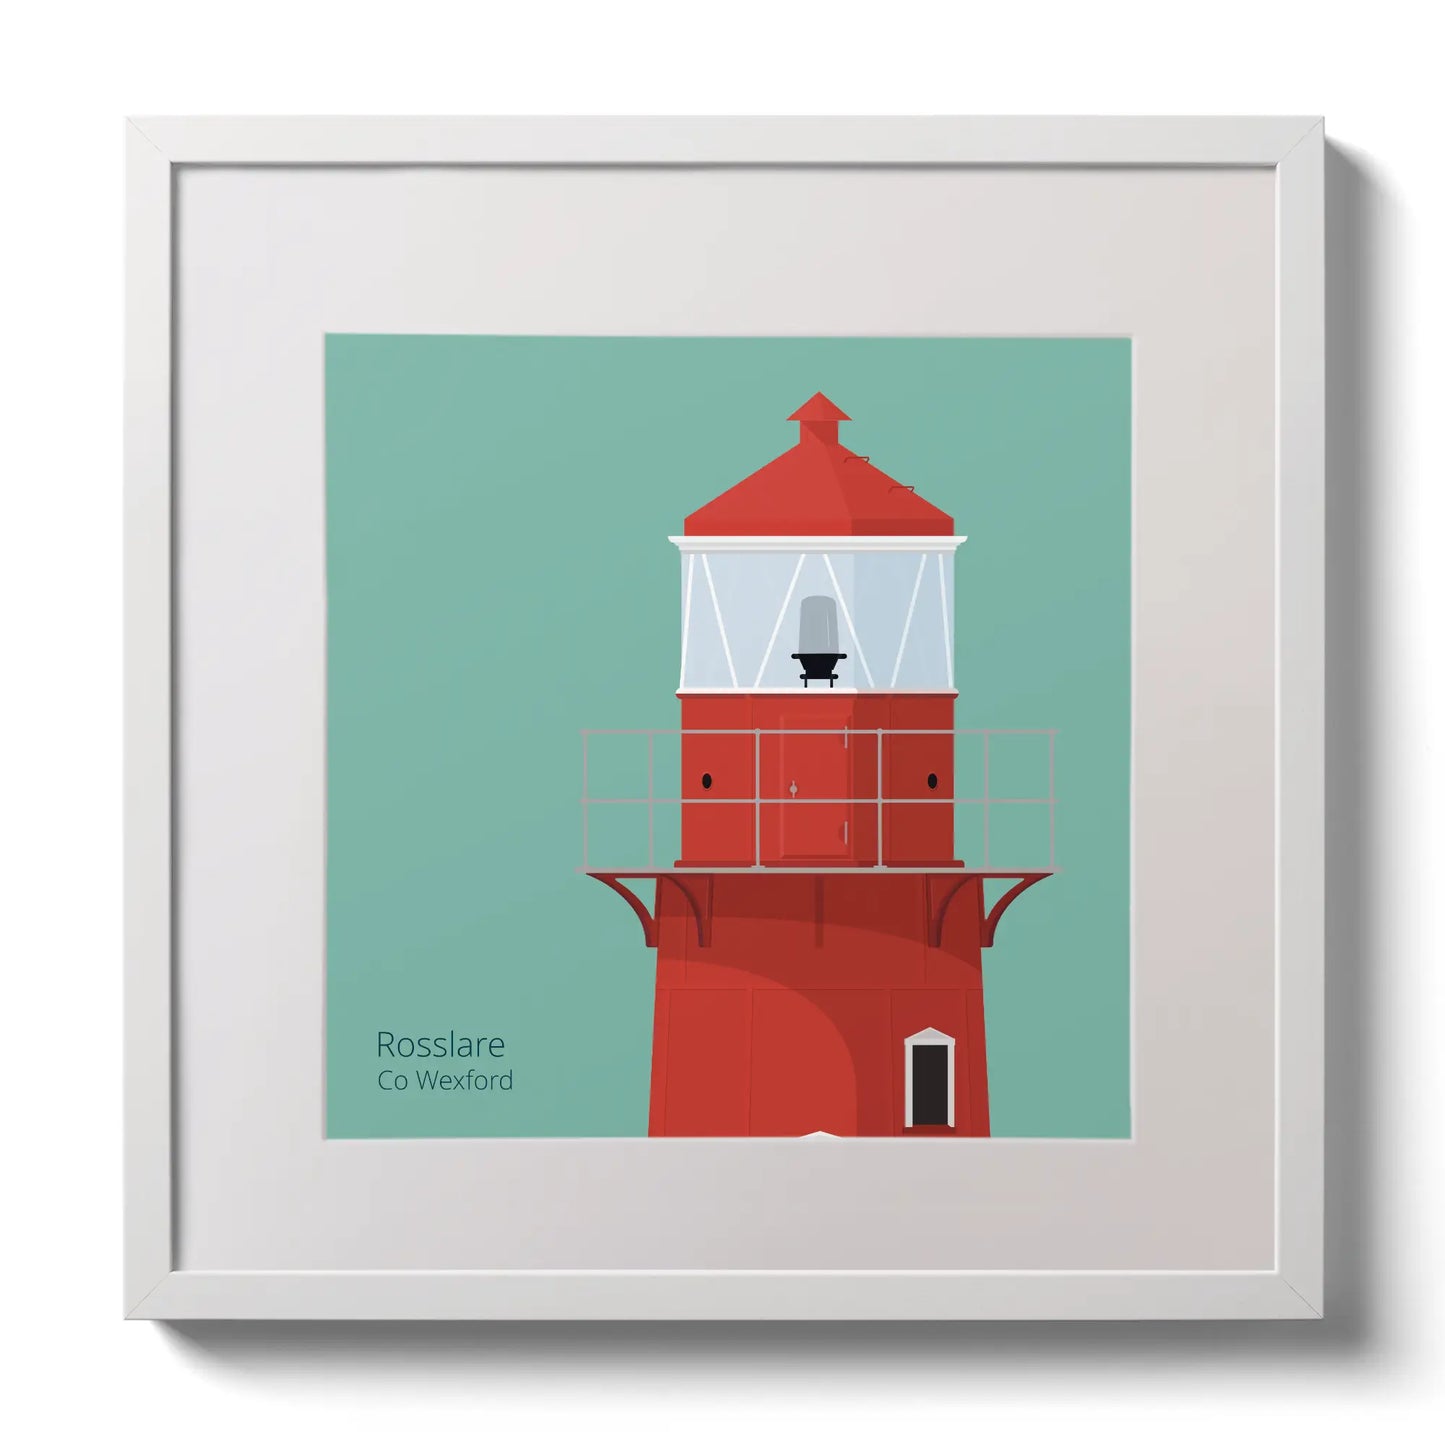 Illustration of Rosslare Harbour lighthouse on an ocean green background,  in a white square frame measuring 30x30cm.